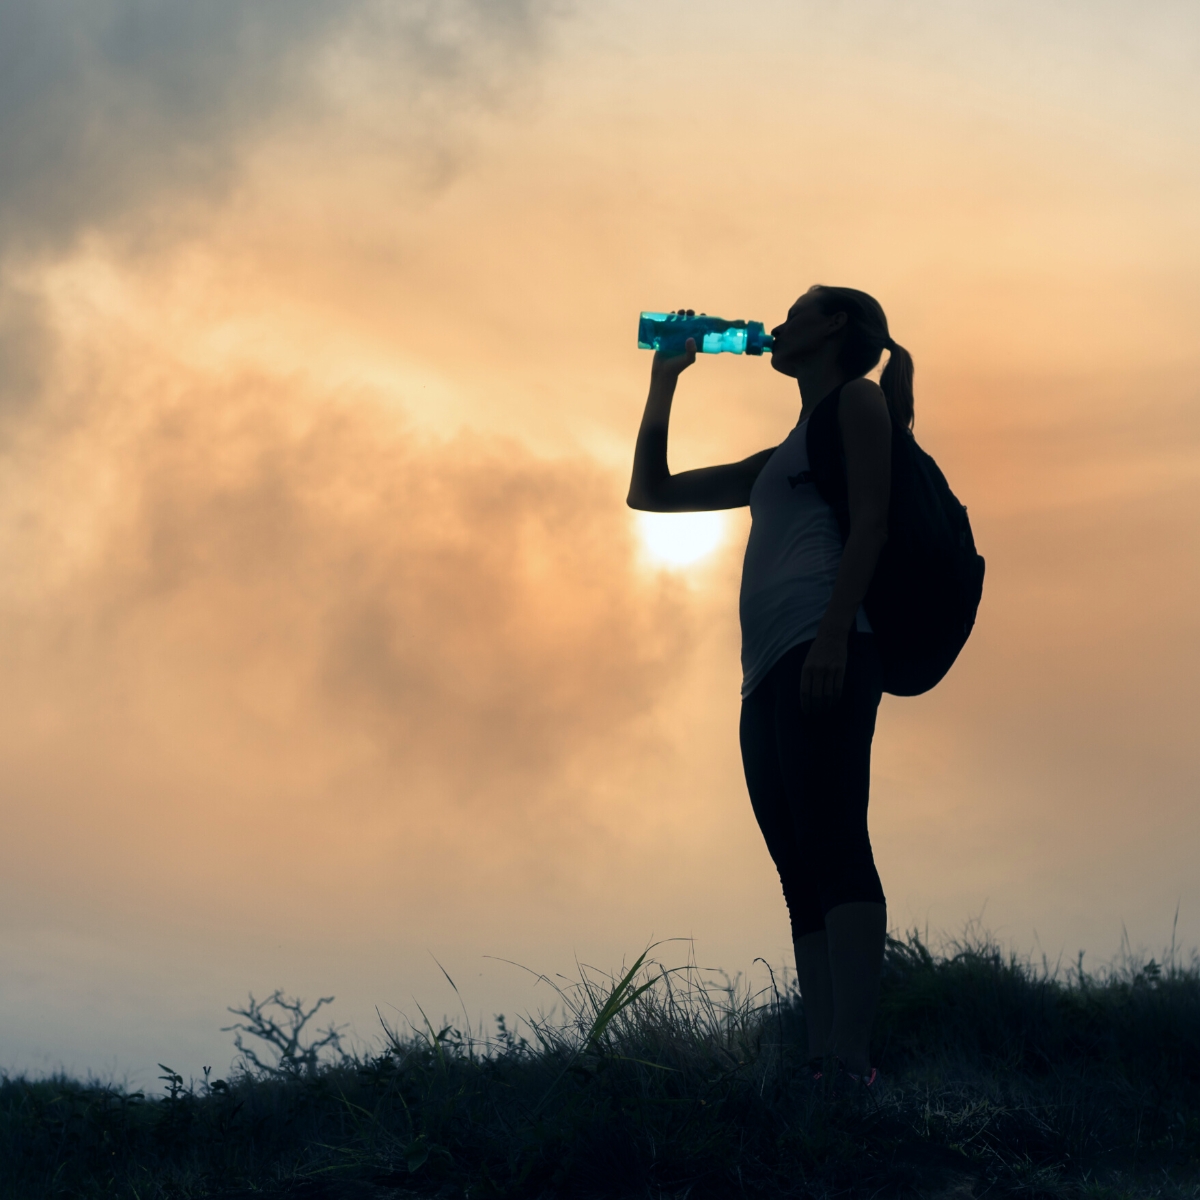 A lady on a ridge at dawn drinking water from a water bottle